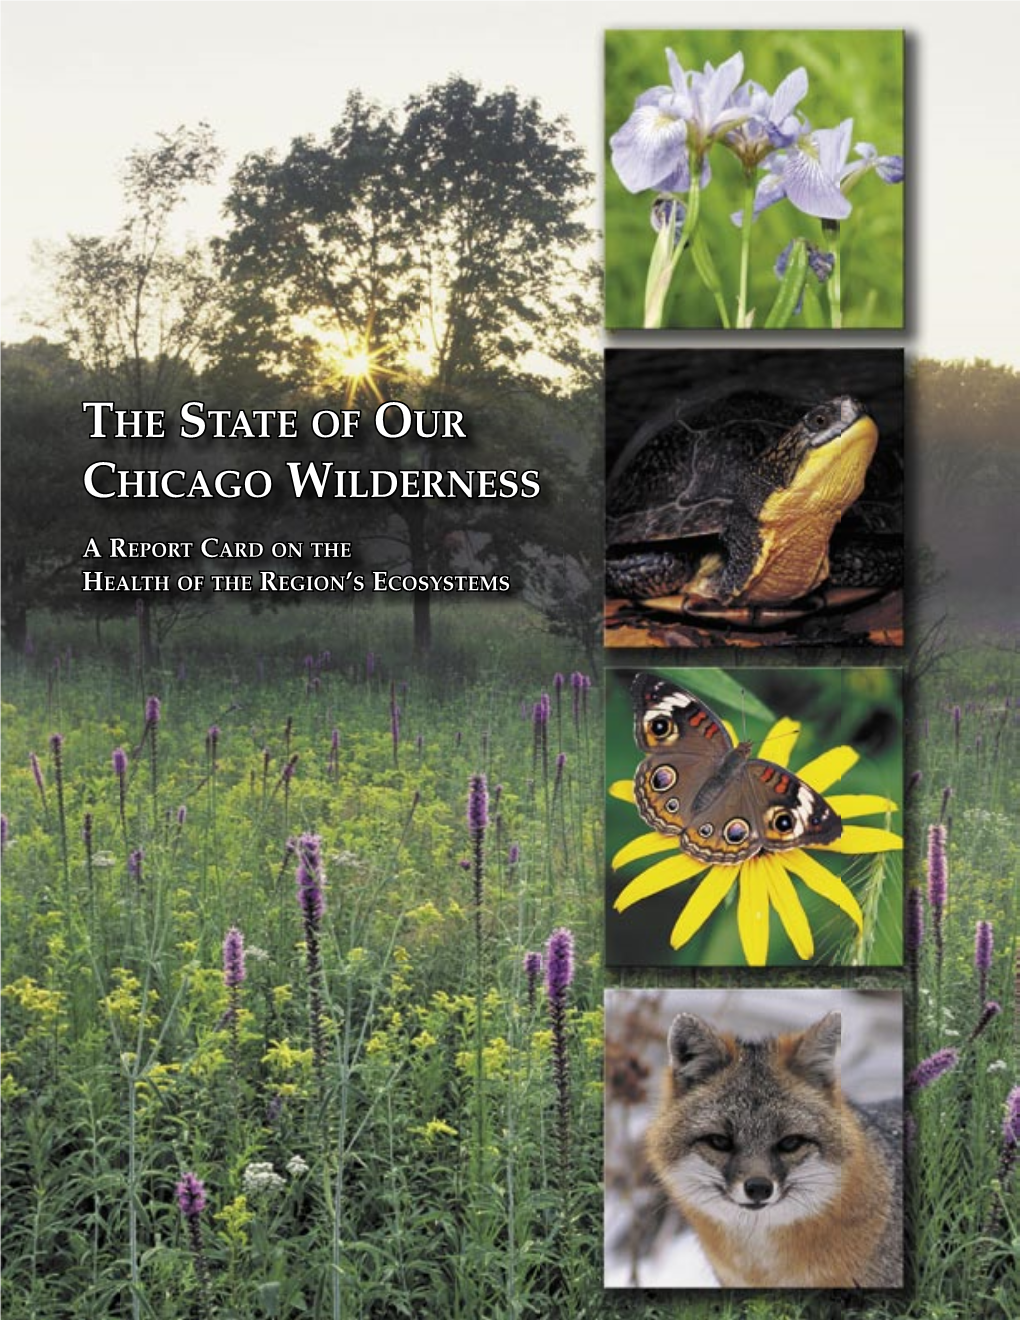 The State of Our Chicago Wilderness